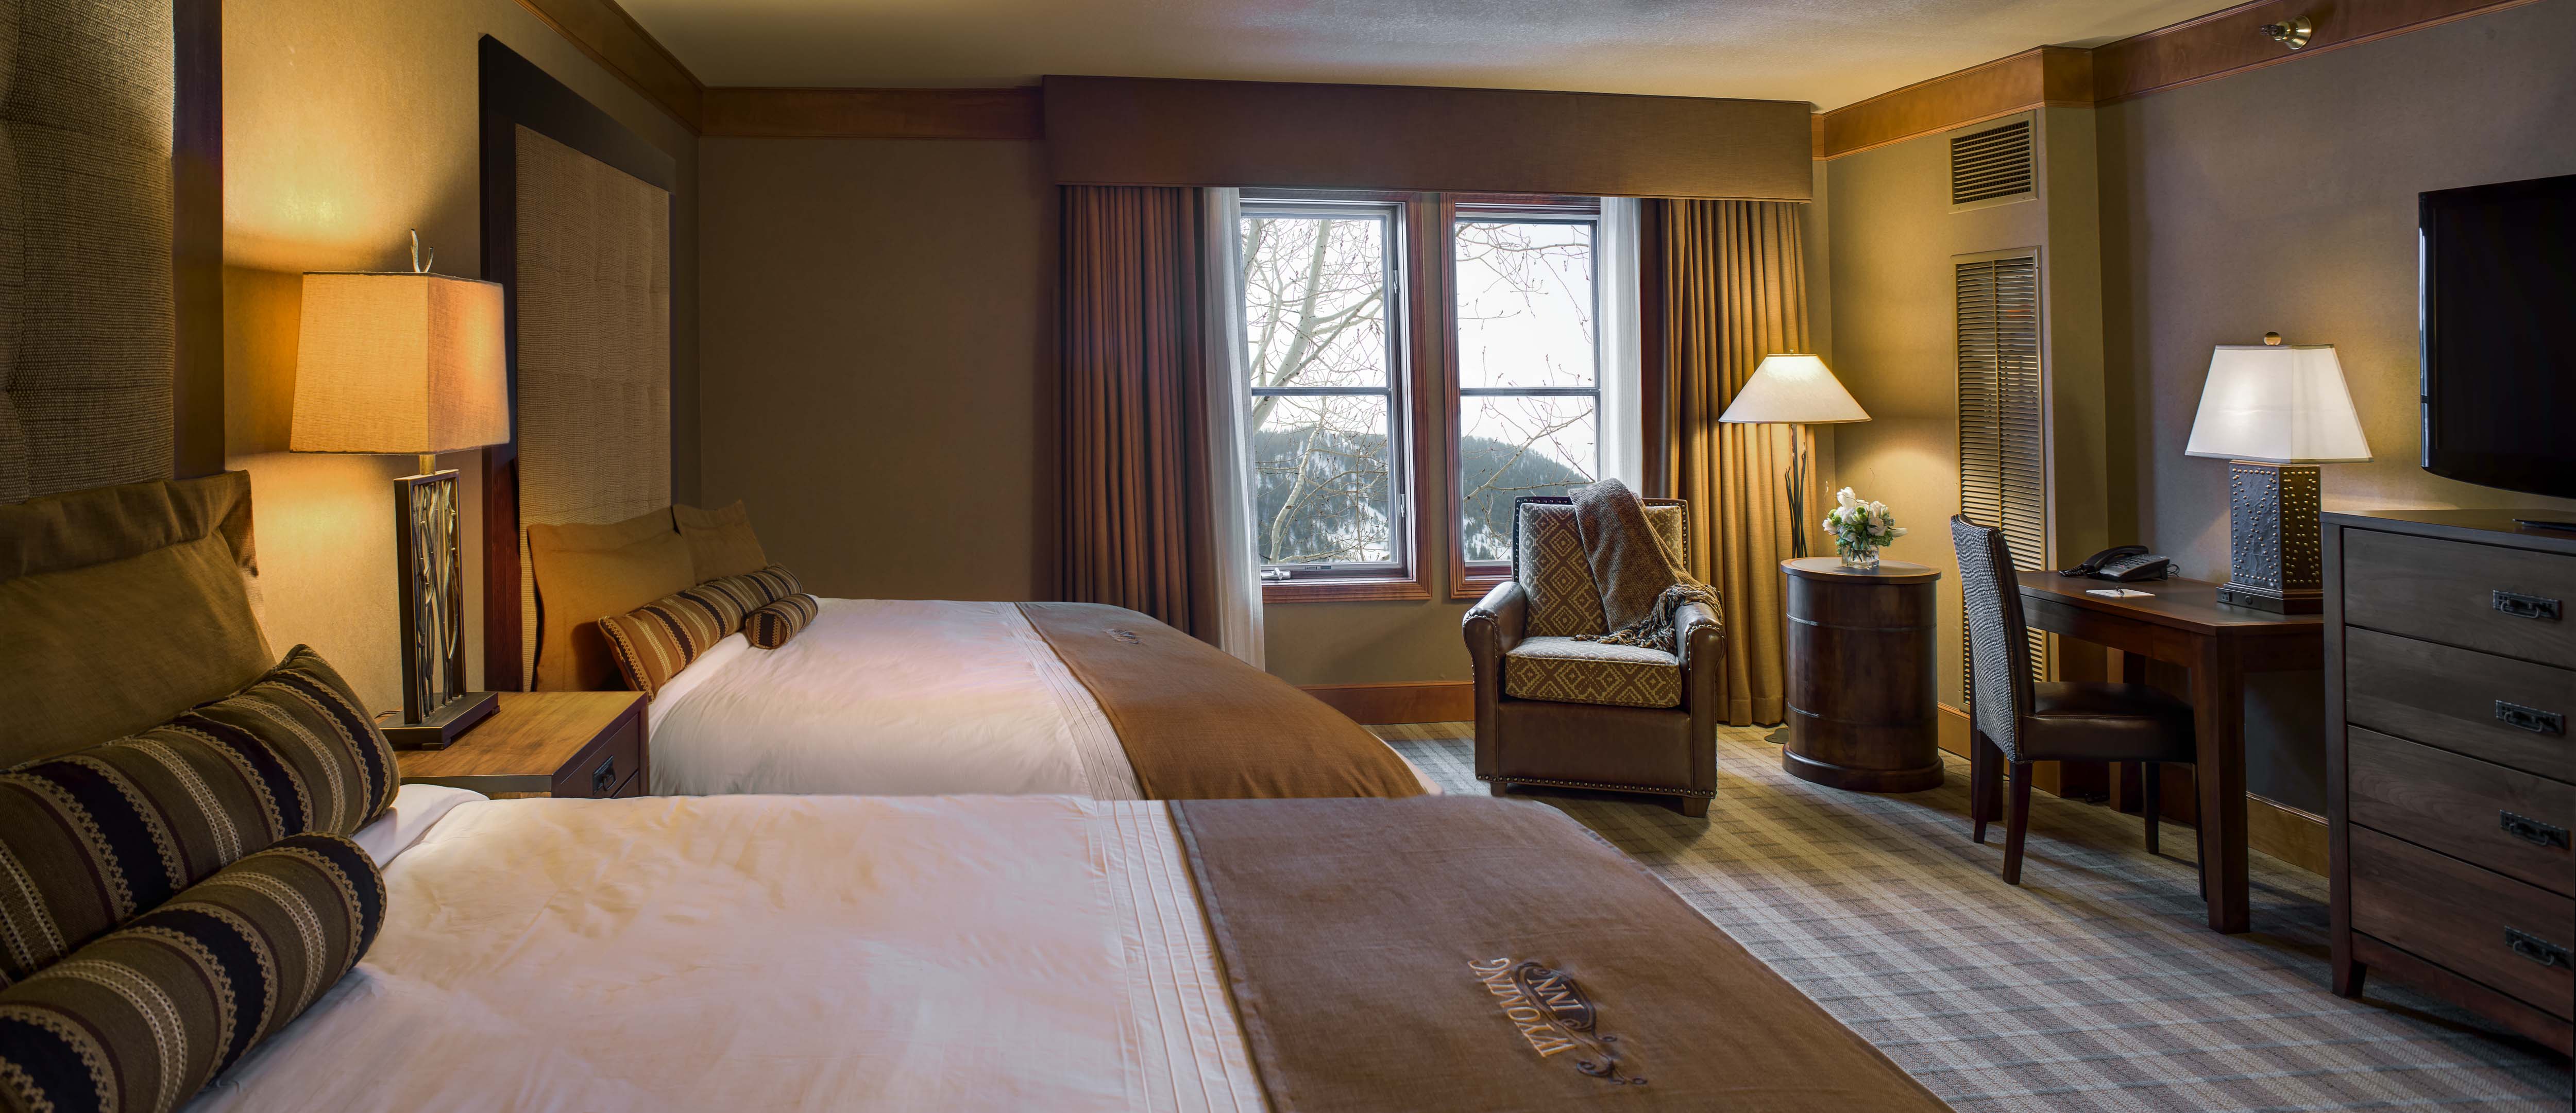 Multimillion-dollar remodel included all-new guest rooms at Wyoming Inn (© Kevin Syms).